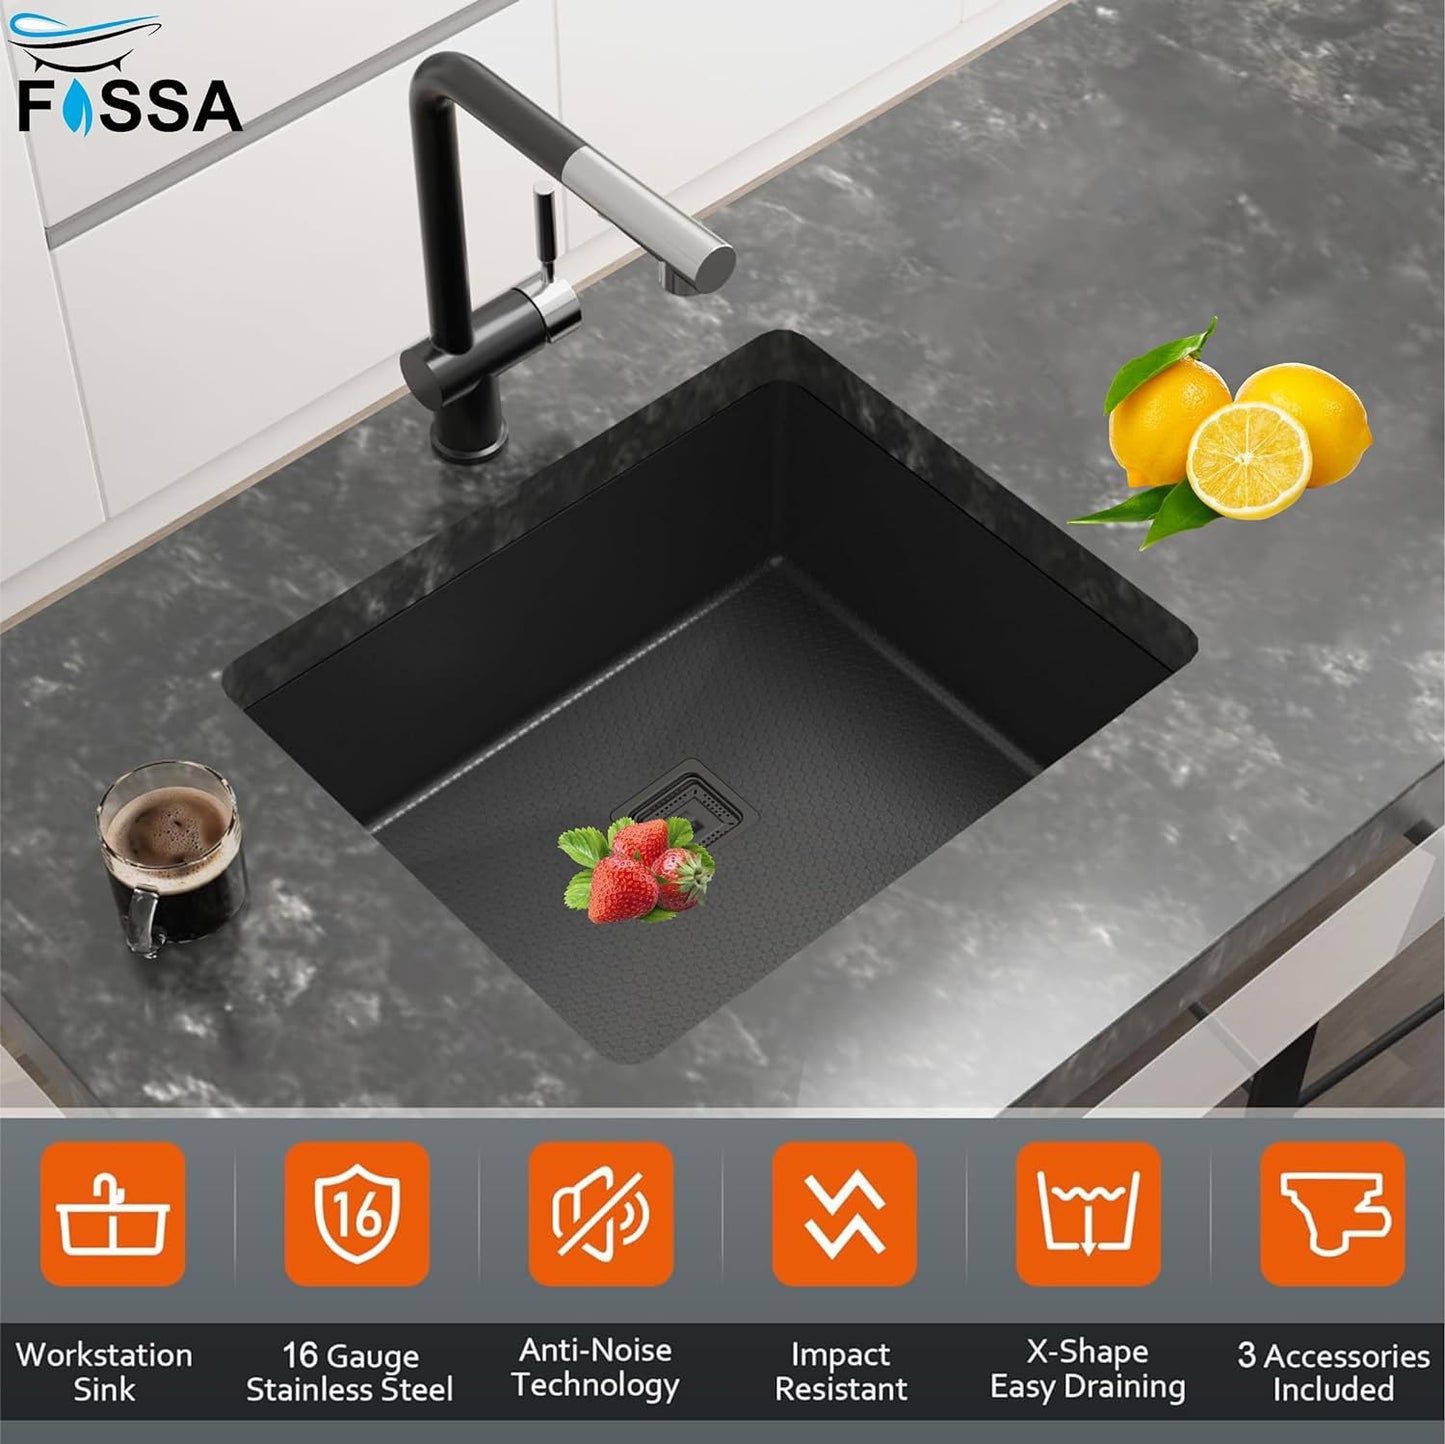 Fossa 21"x18"x09" Single Bowl Honeycomb Embossed Sink with Black Nano Coating, Stainless Steel Single Bowl Sink, Rectangular Workstation with Drainer and Overflow Set (Black)